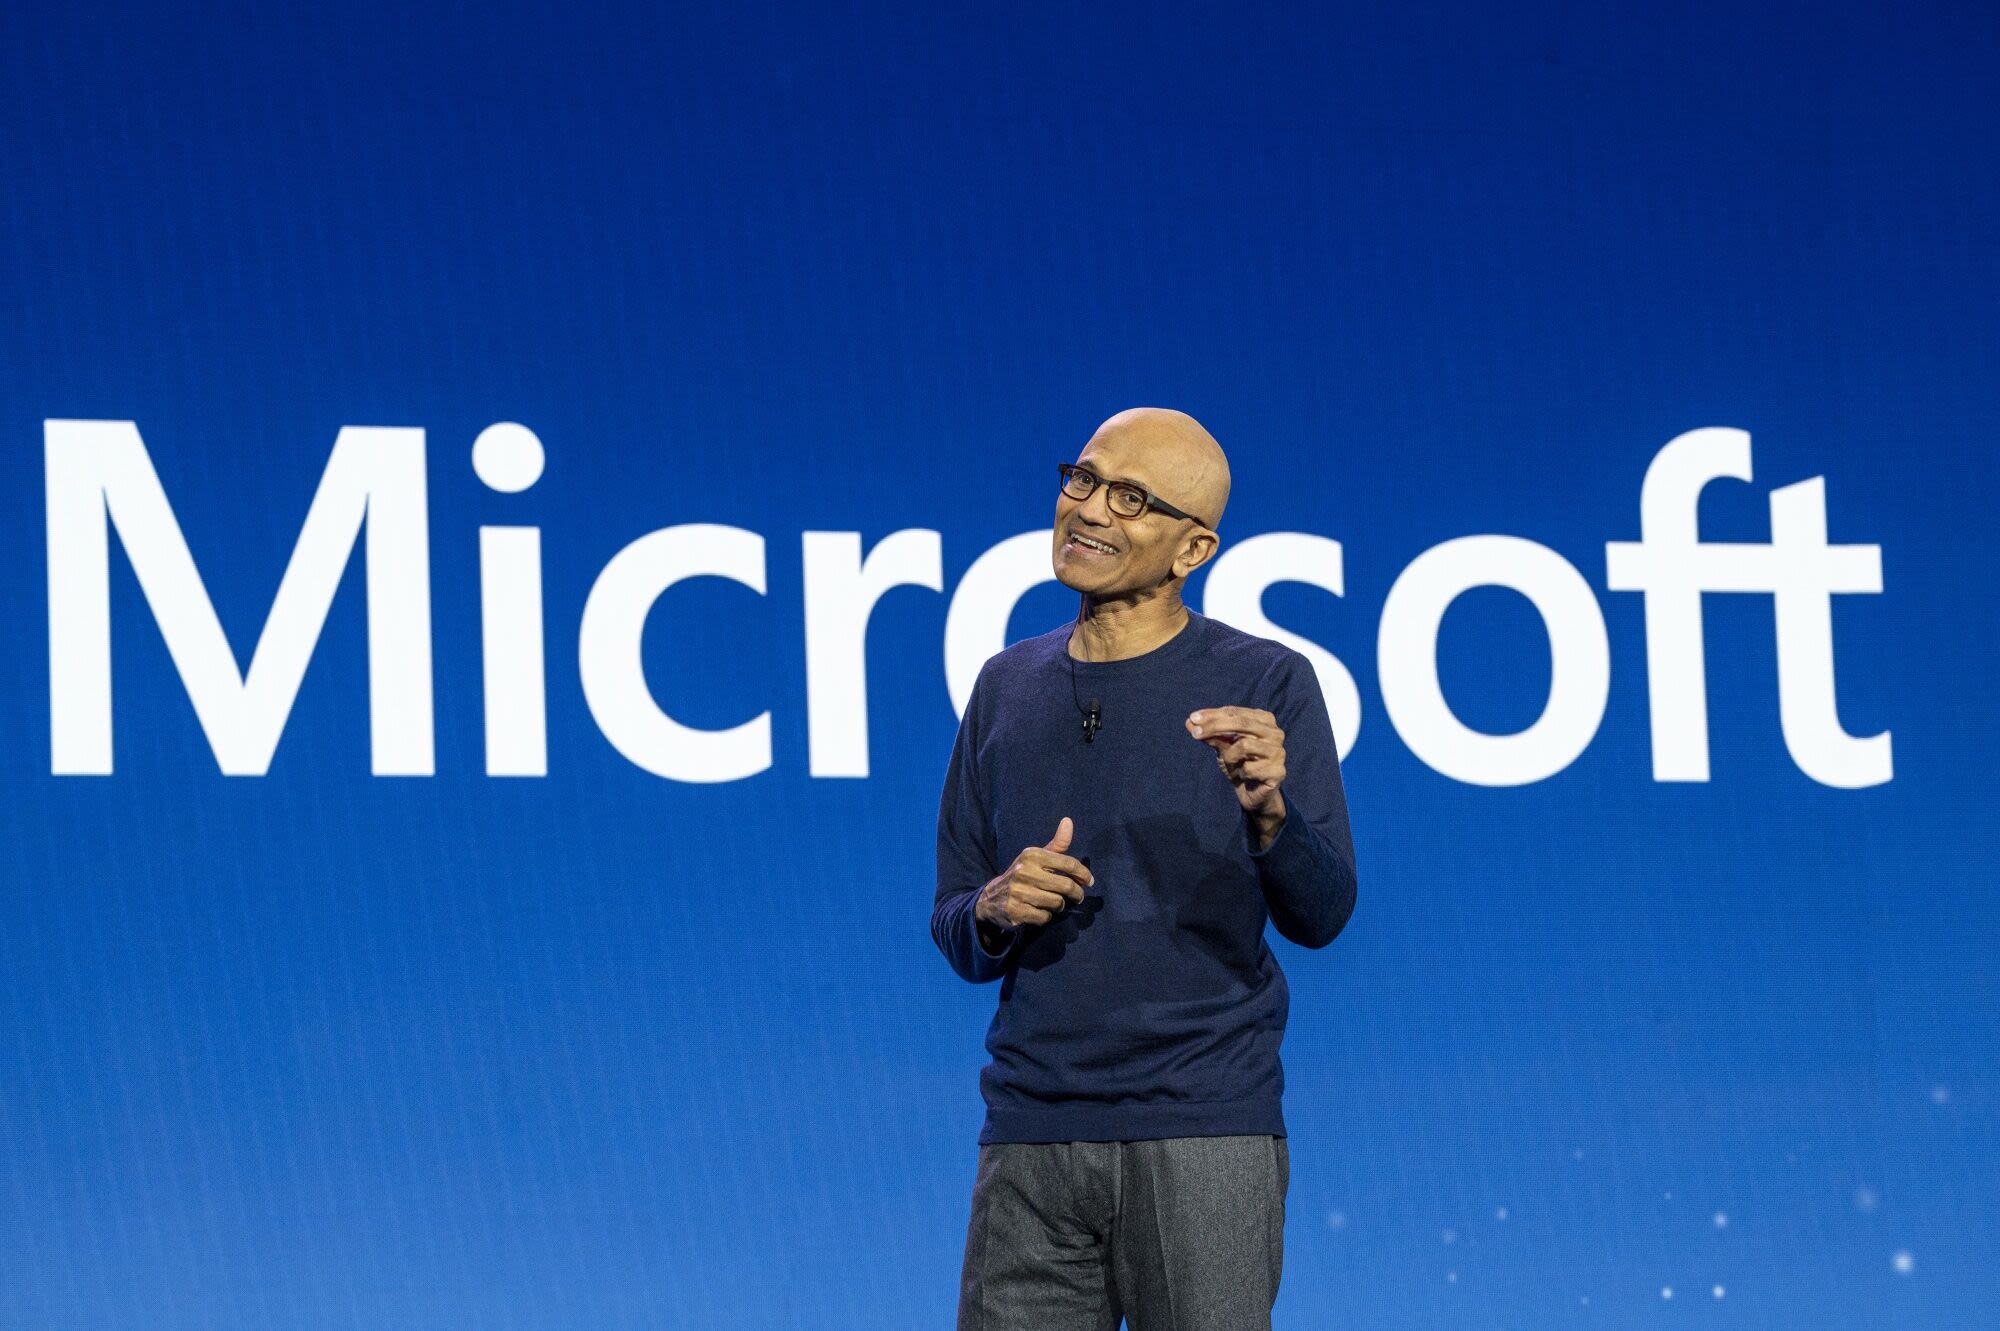 Microsoft CEO to Meet Indonesian President During Regional Tour